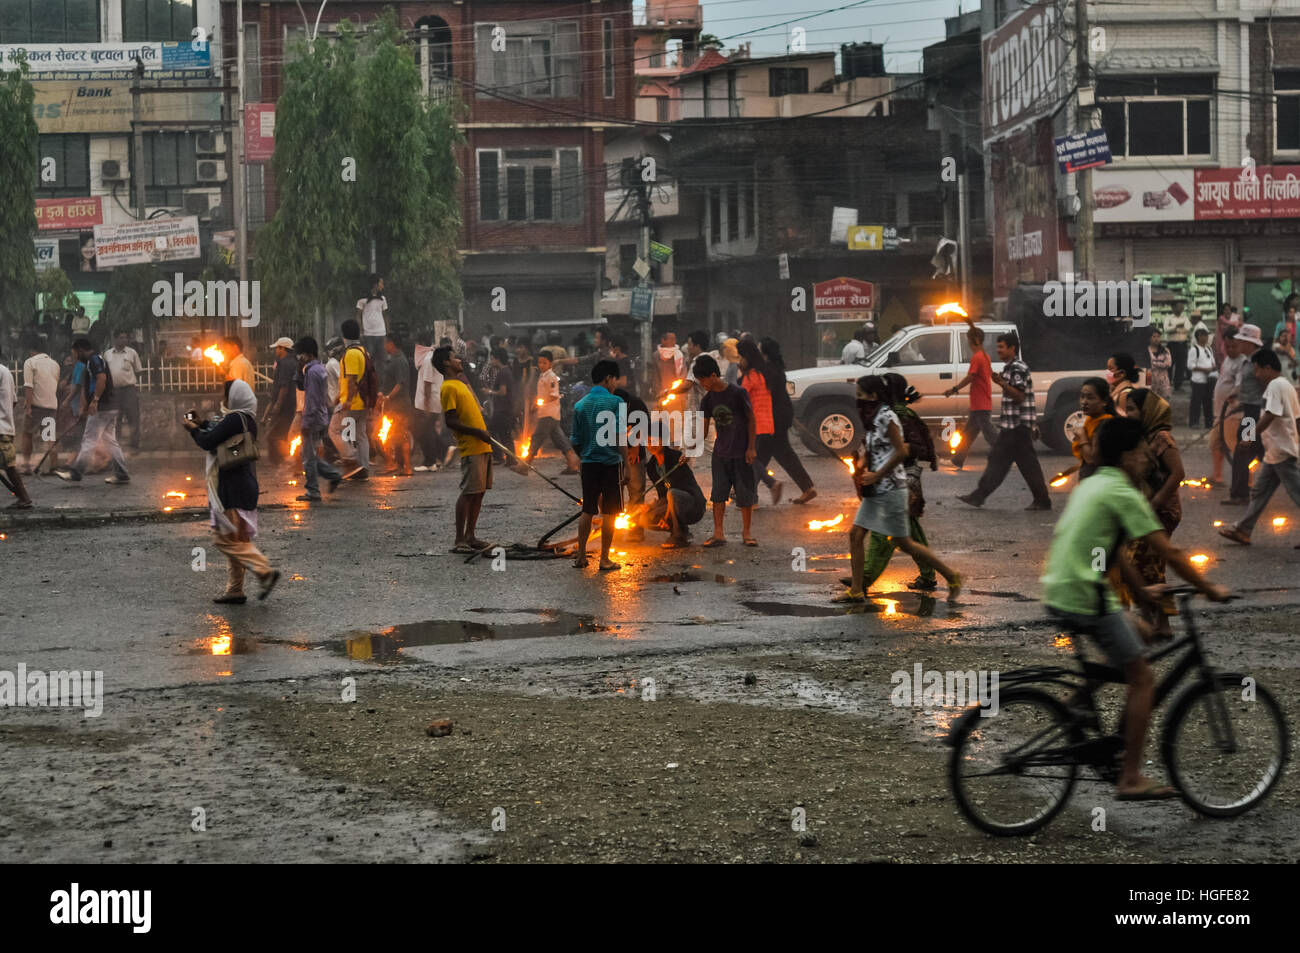 Nepal - circa May 2012: People walk on street and hold burning torches during Nepal general strike. Documentary editorial. Stock Photo